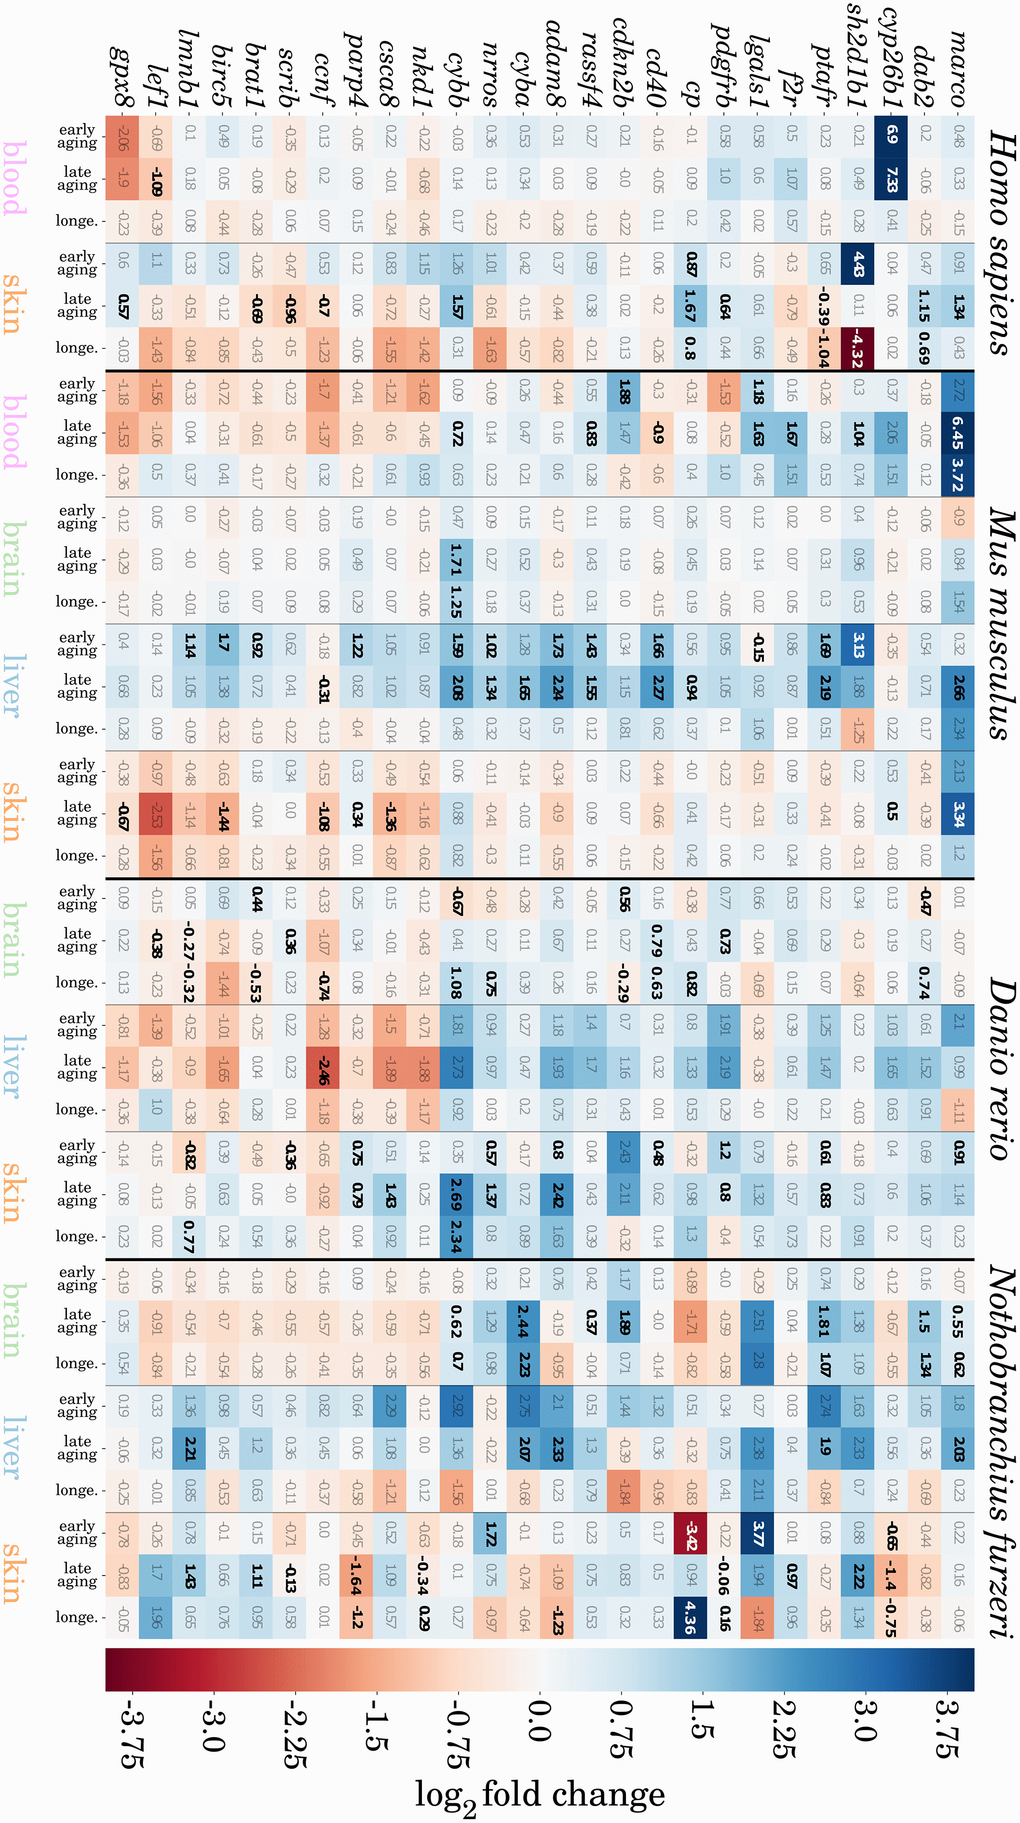 Heatmap representation of potentially conserved senescence- and inflammation-related genes. Genes are represented as mouse orthologues (a complete list of gene orthologues can be found in Supplementary Data 8). Numbers indicate log2 fold changes between two compared ages, where a positive value indicates an upregulation (blue), and a negative value downregulation (red) of the respective gene with aging. All significant changes in gene expression are indicated in bold. For detailed information, see Supplementary Data 7.